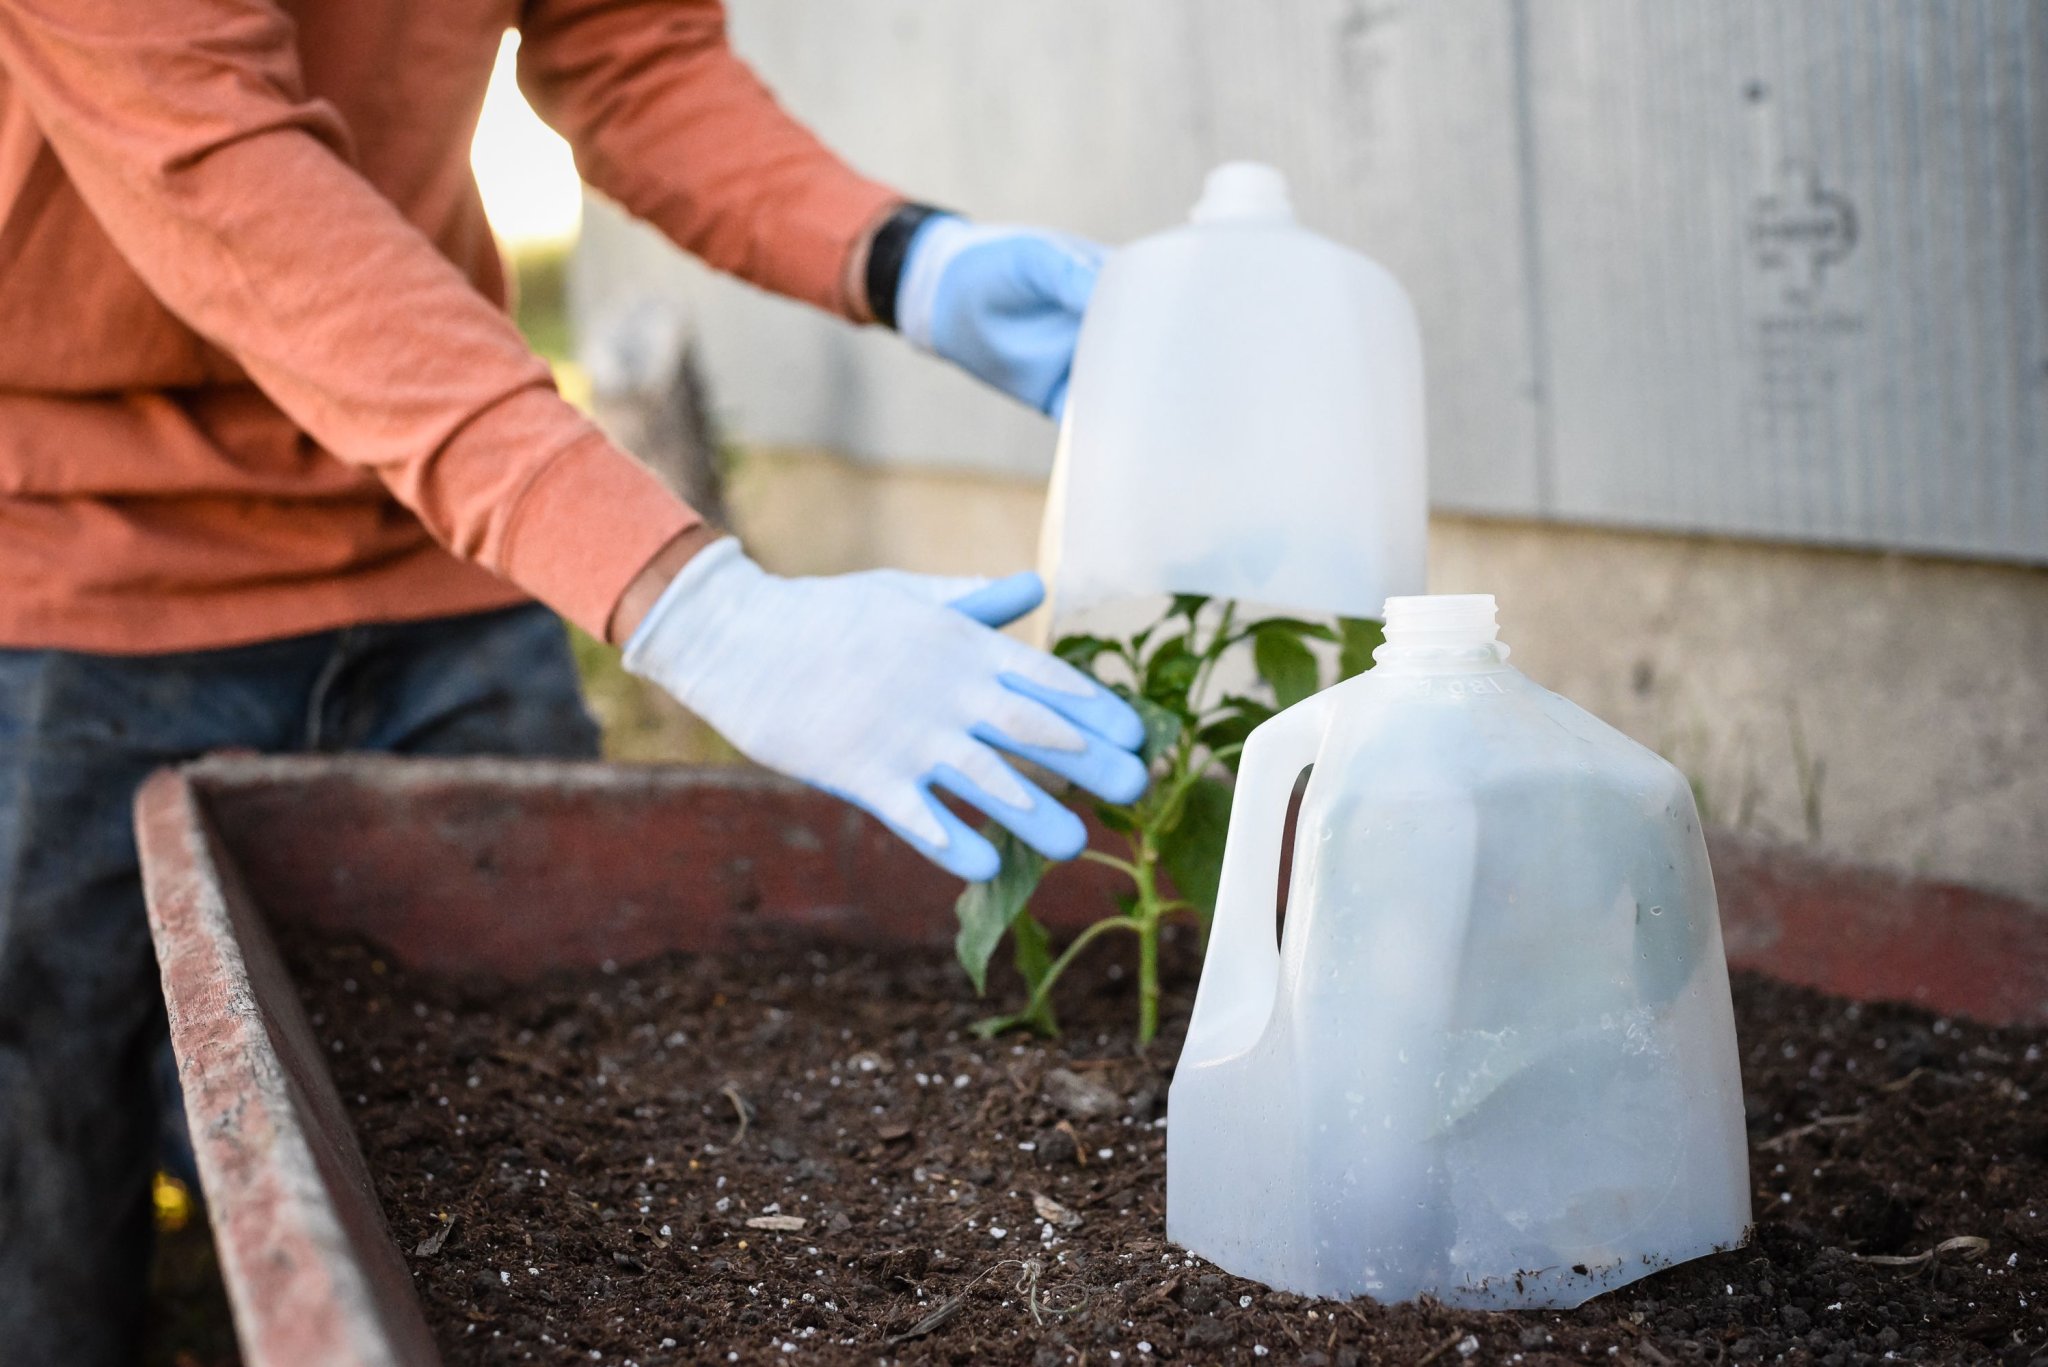 How to Protect Plants from Frost So They Survive Cold Snaps